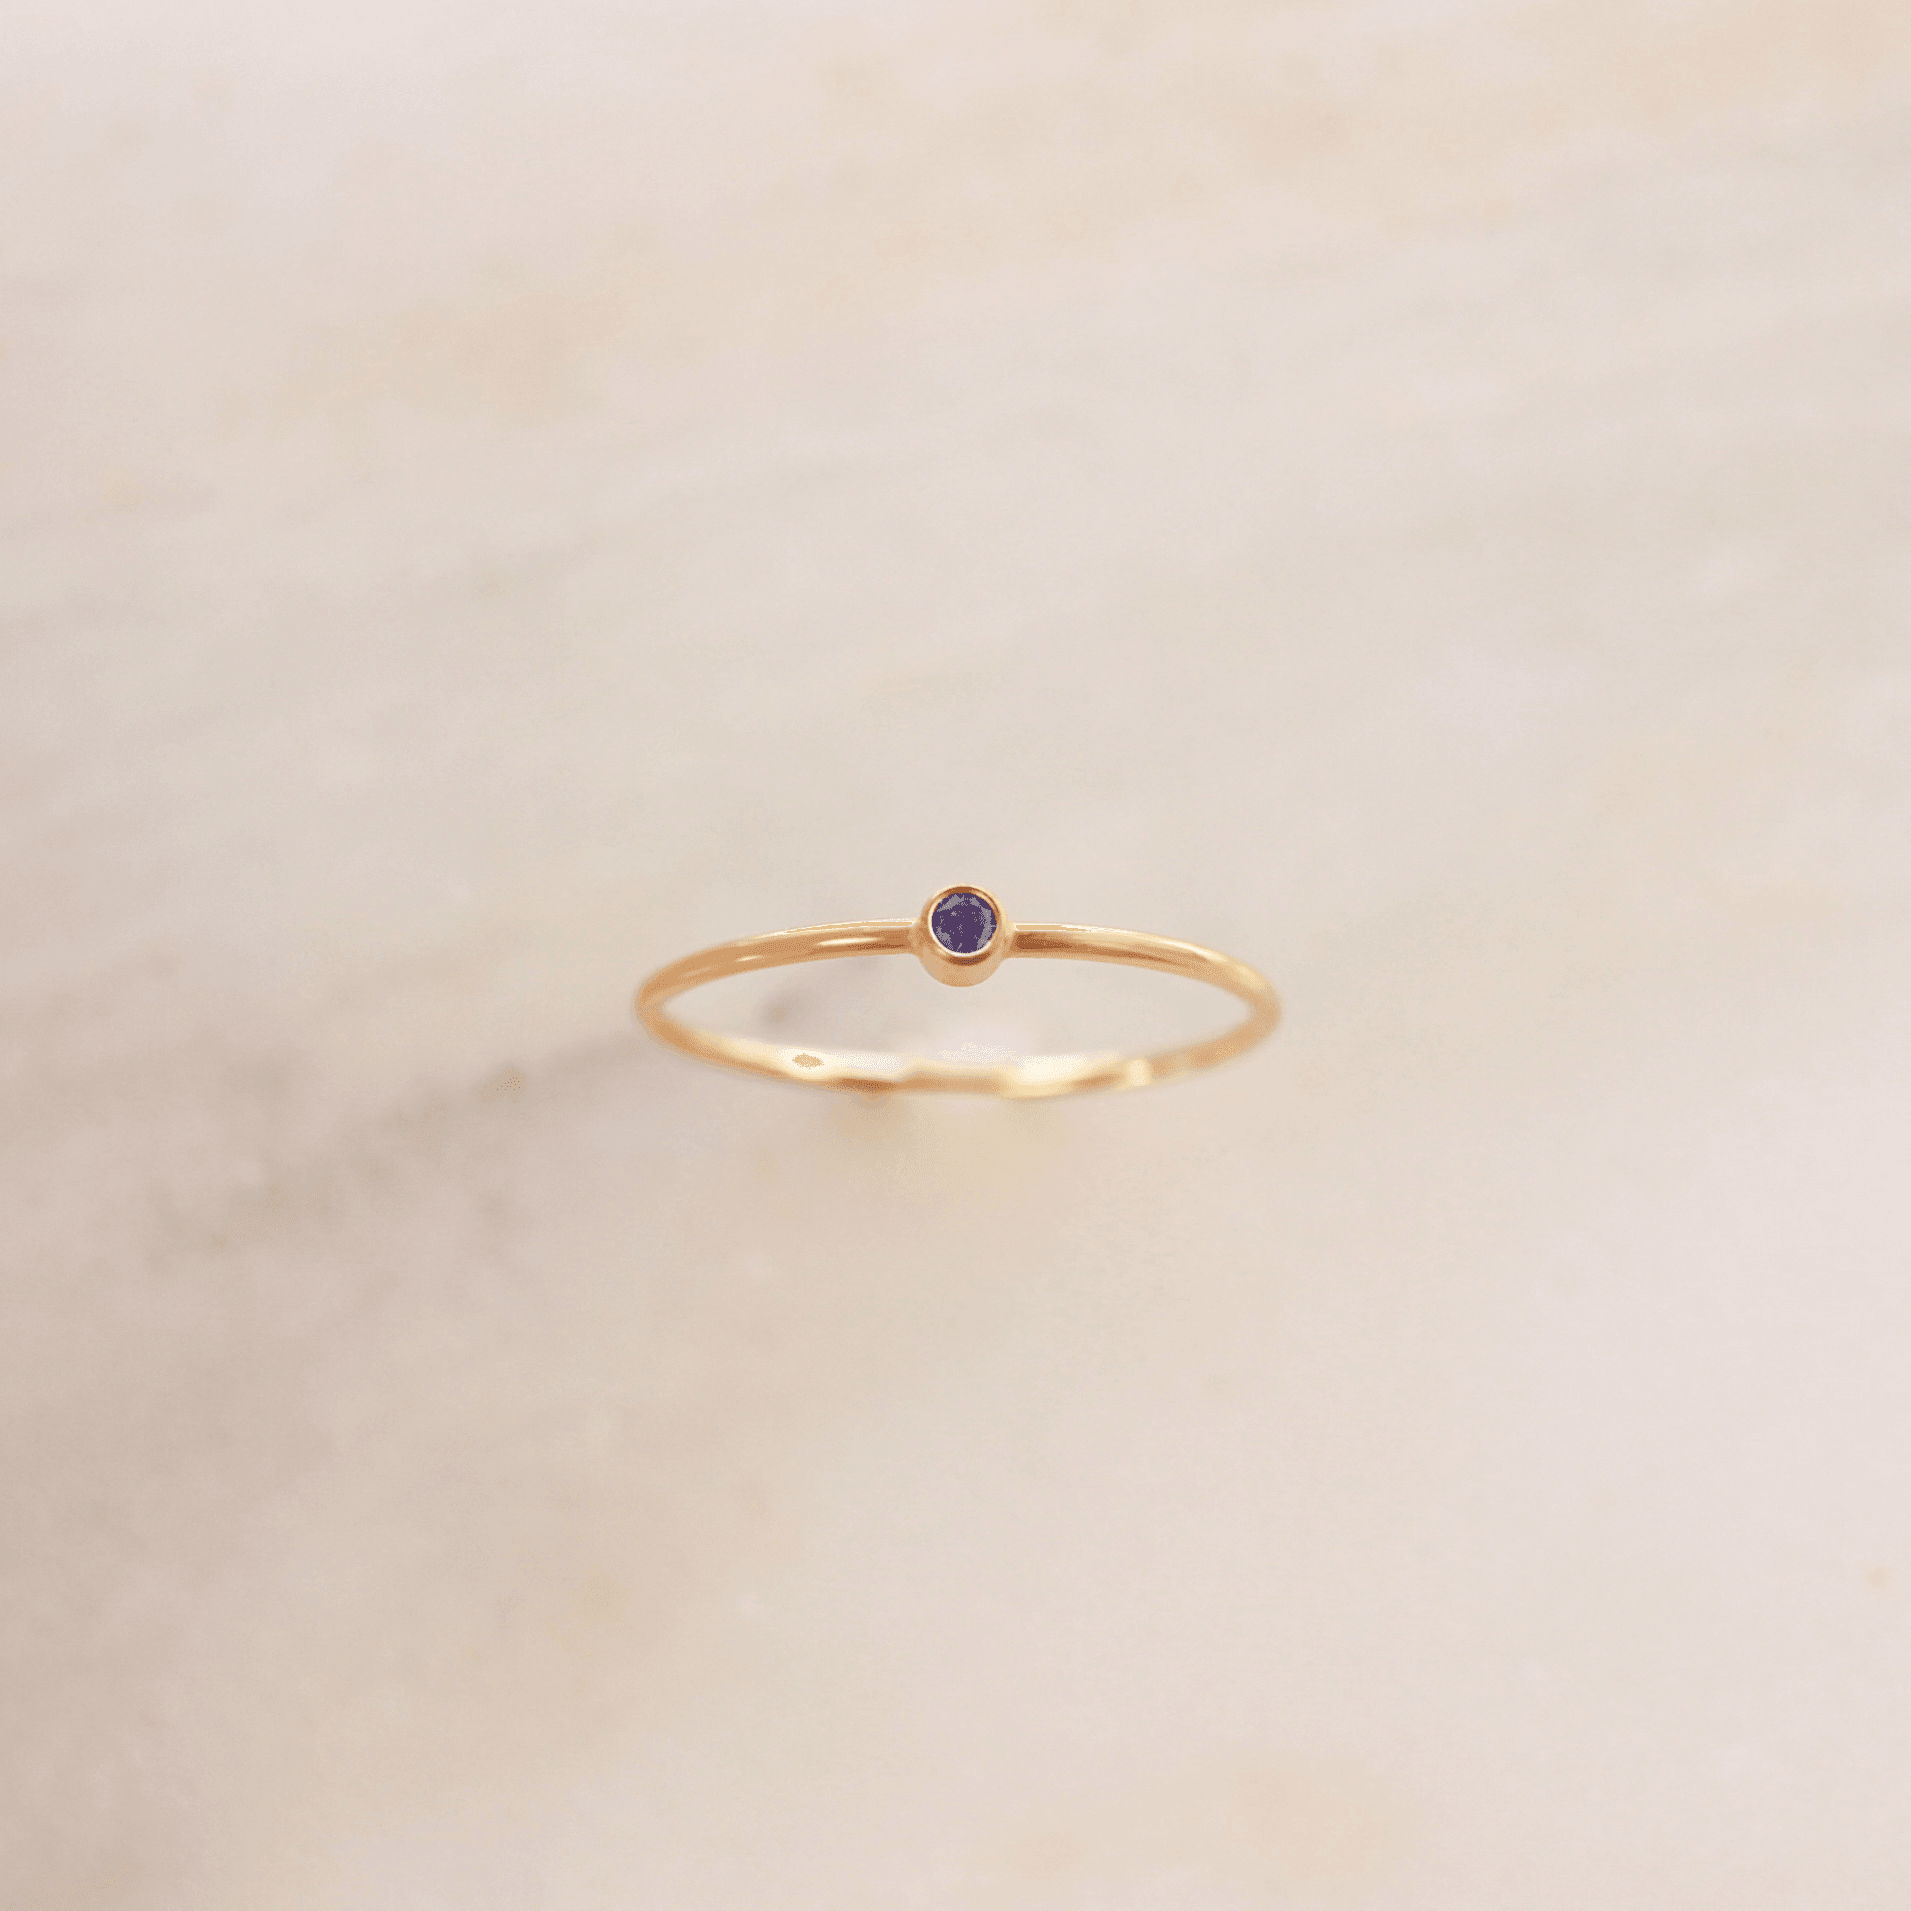 Tiny February Birthstone Ring ∙ Amethyst - Nolia Jewelry - Meaningful + Sustainably Handcrafted Jewelry